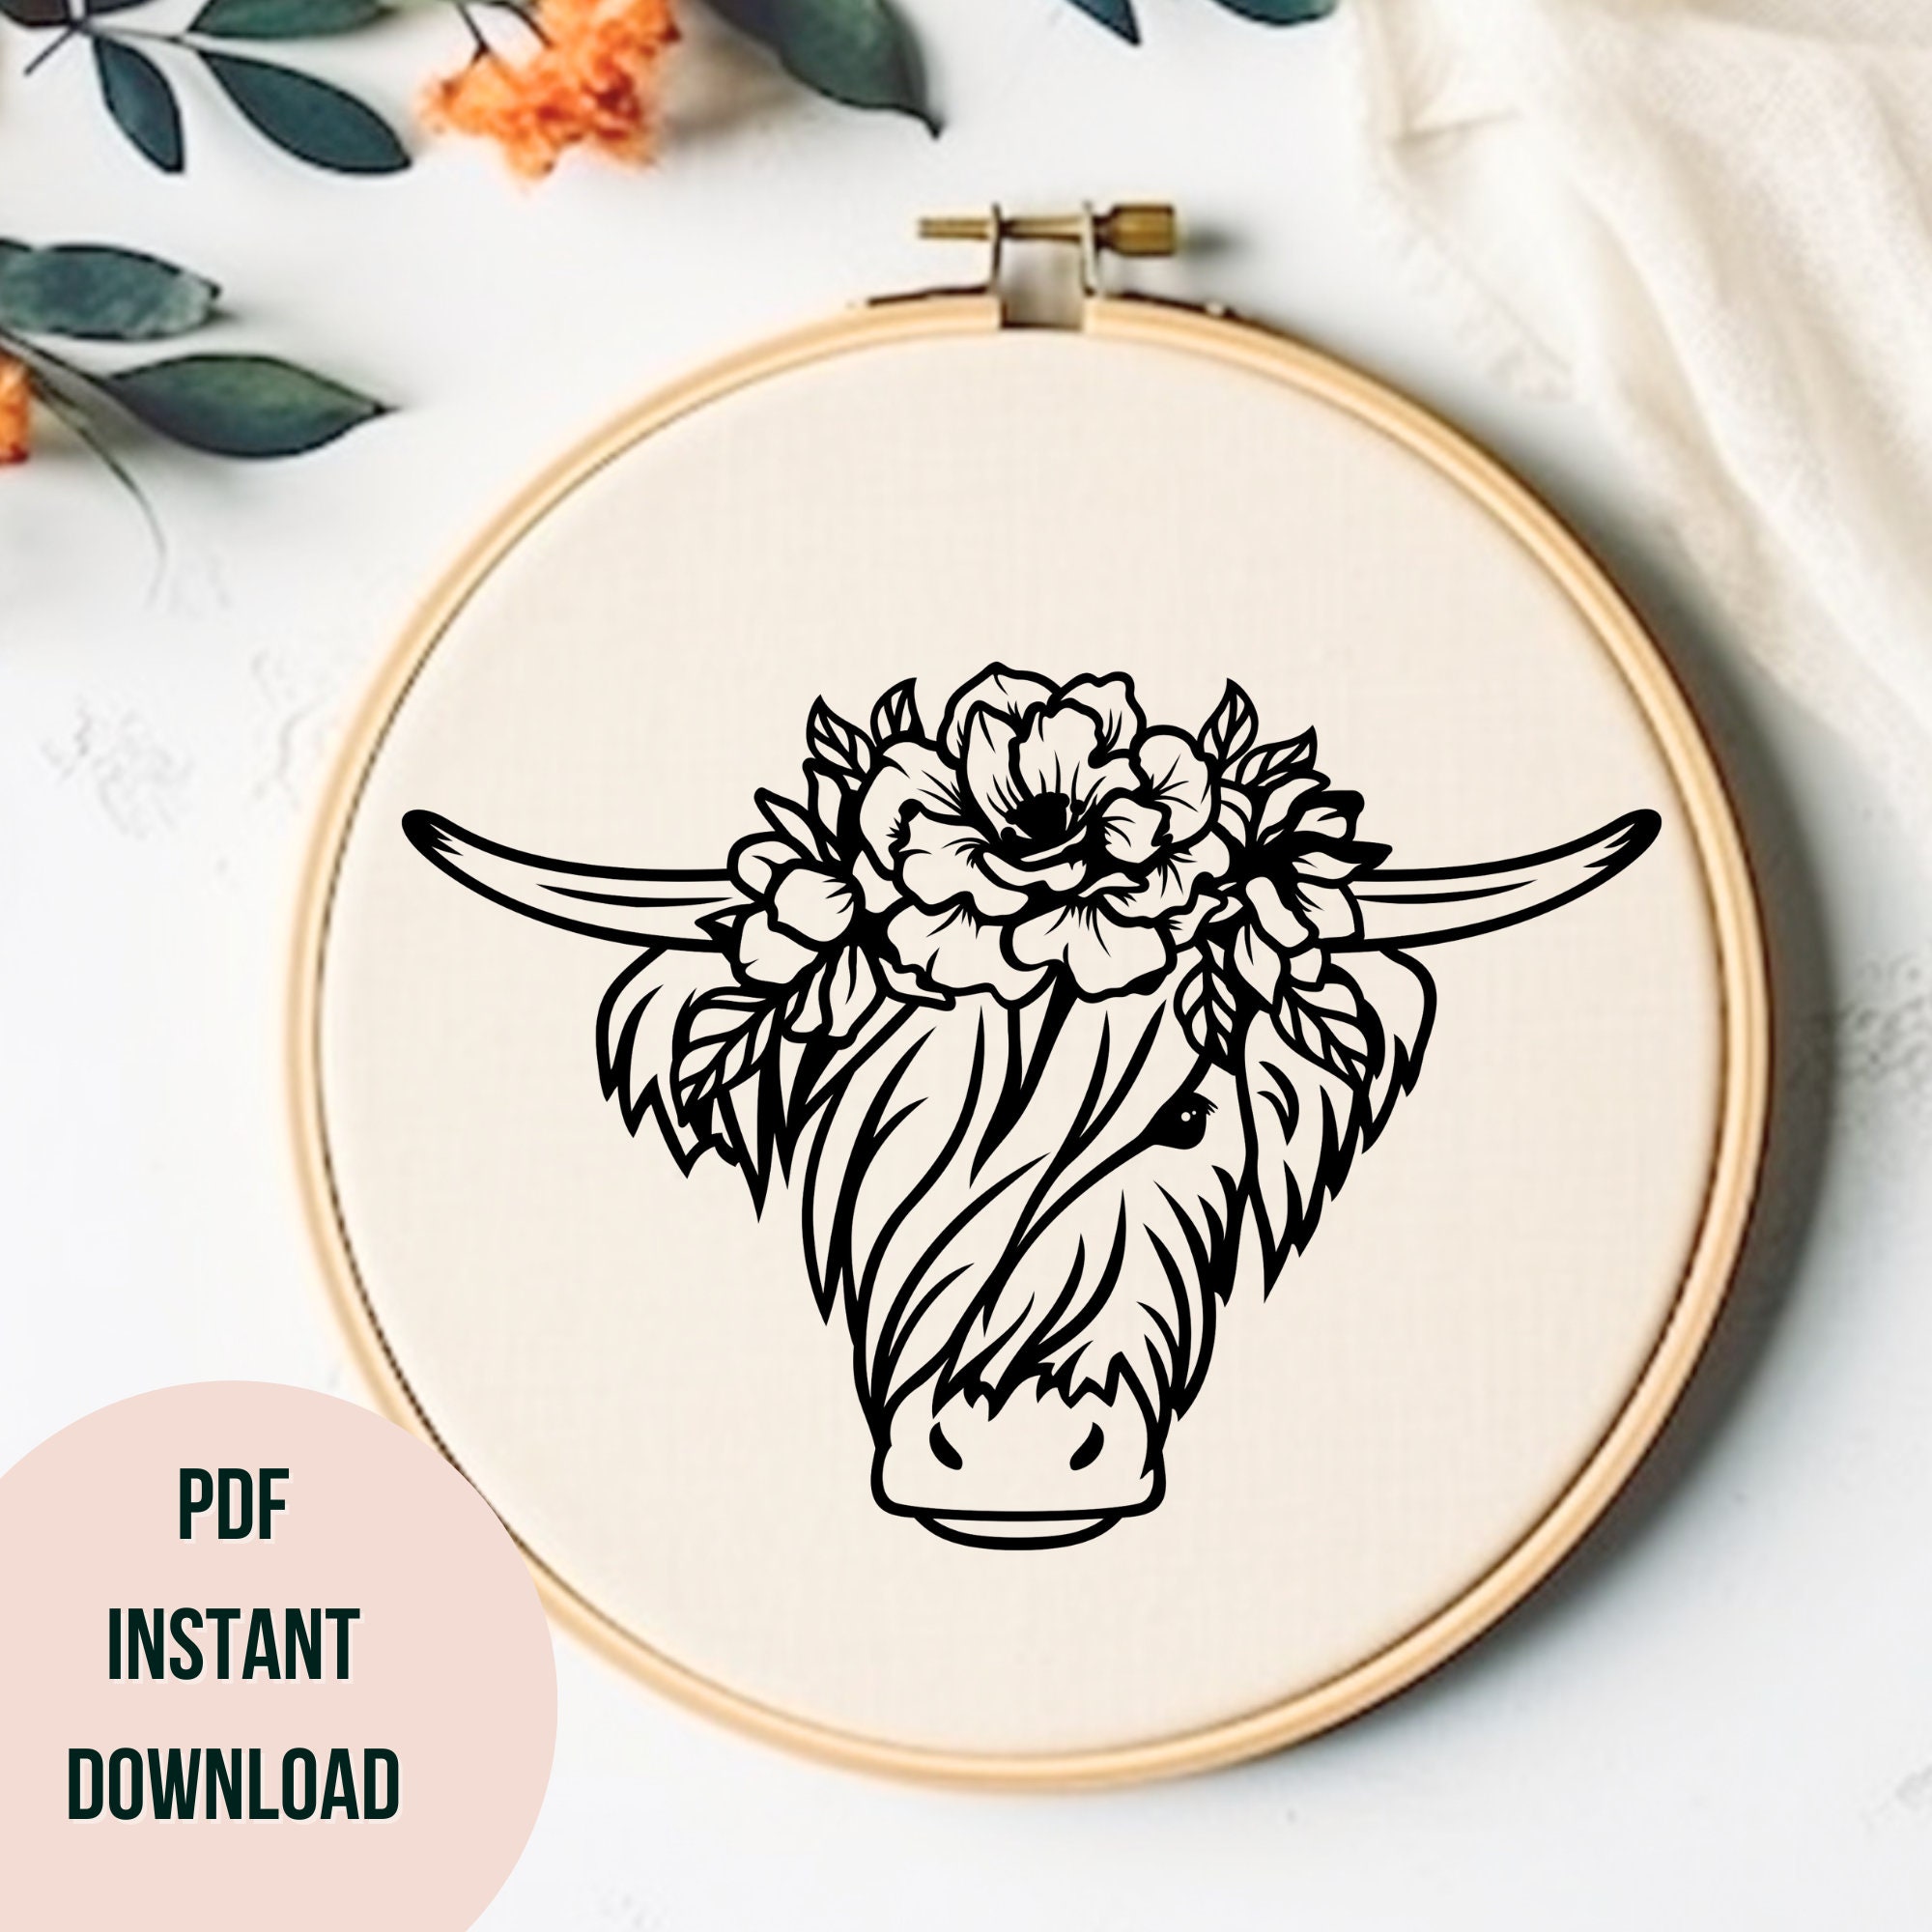 Iron on Hand Embroidery Patterns. Hand Sewing. Iron on Transfer. Embroidery  Designs. Embroidery Gift. Craft Kit. Craft Gifts. Hand Stitched. 